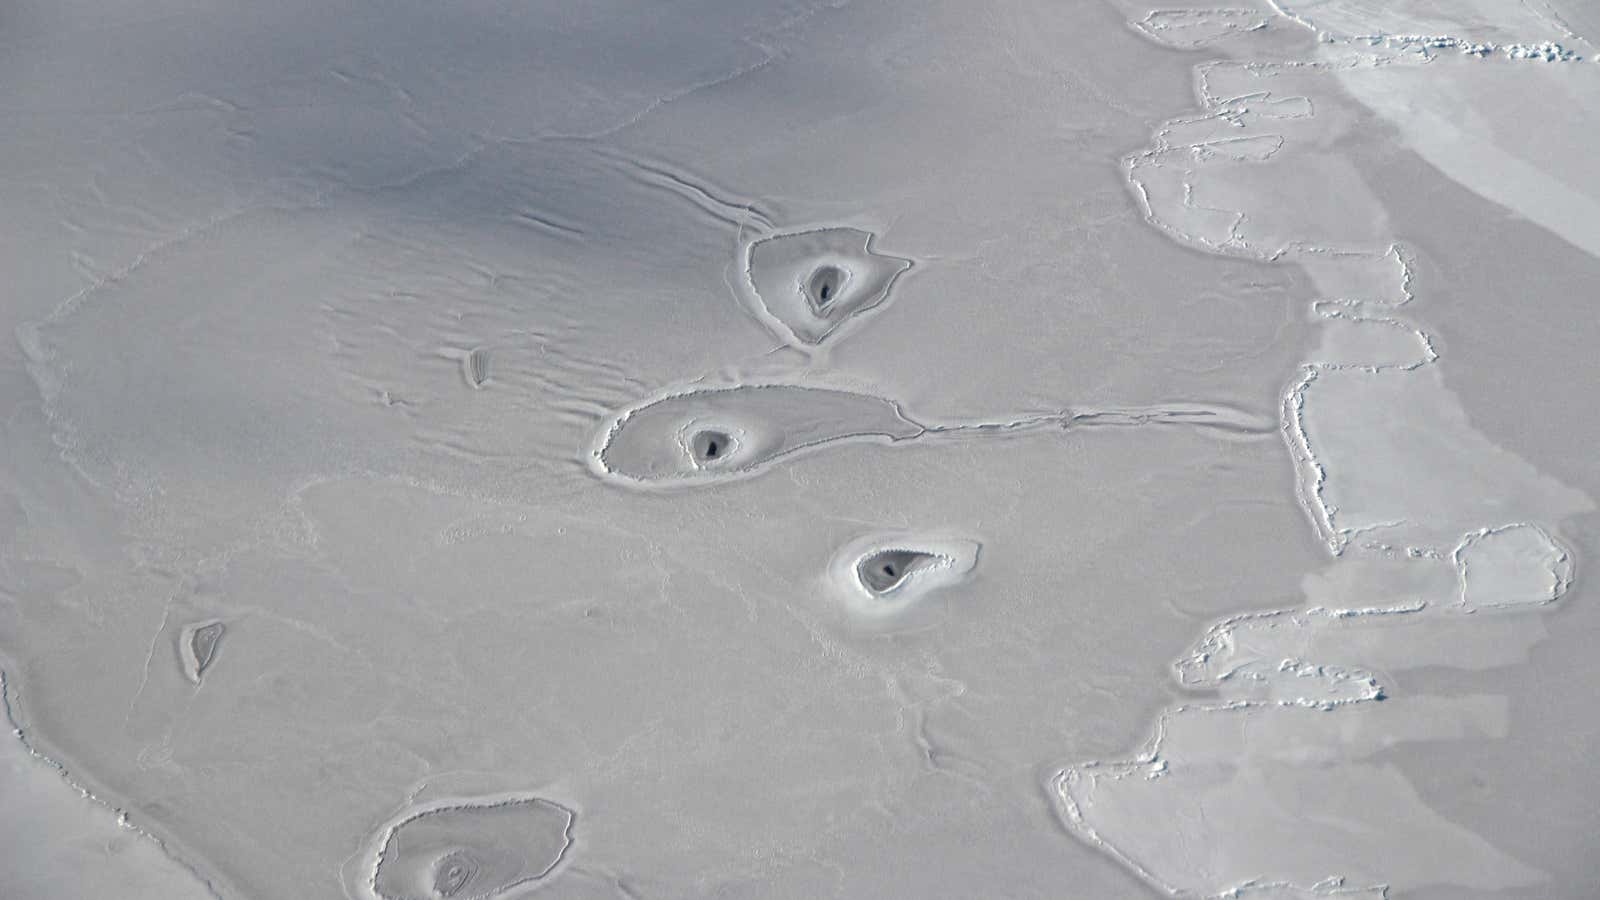 Ice circles in the Arctic are most likely seal breathing holes.